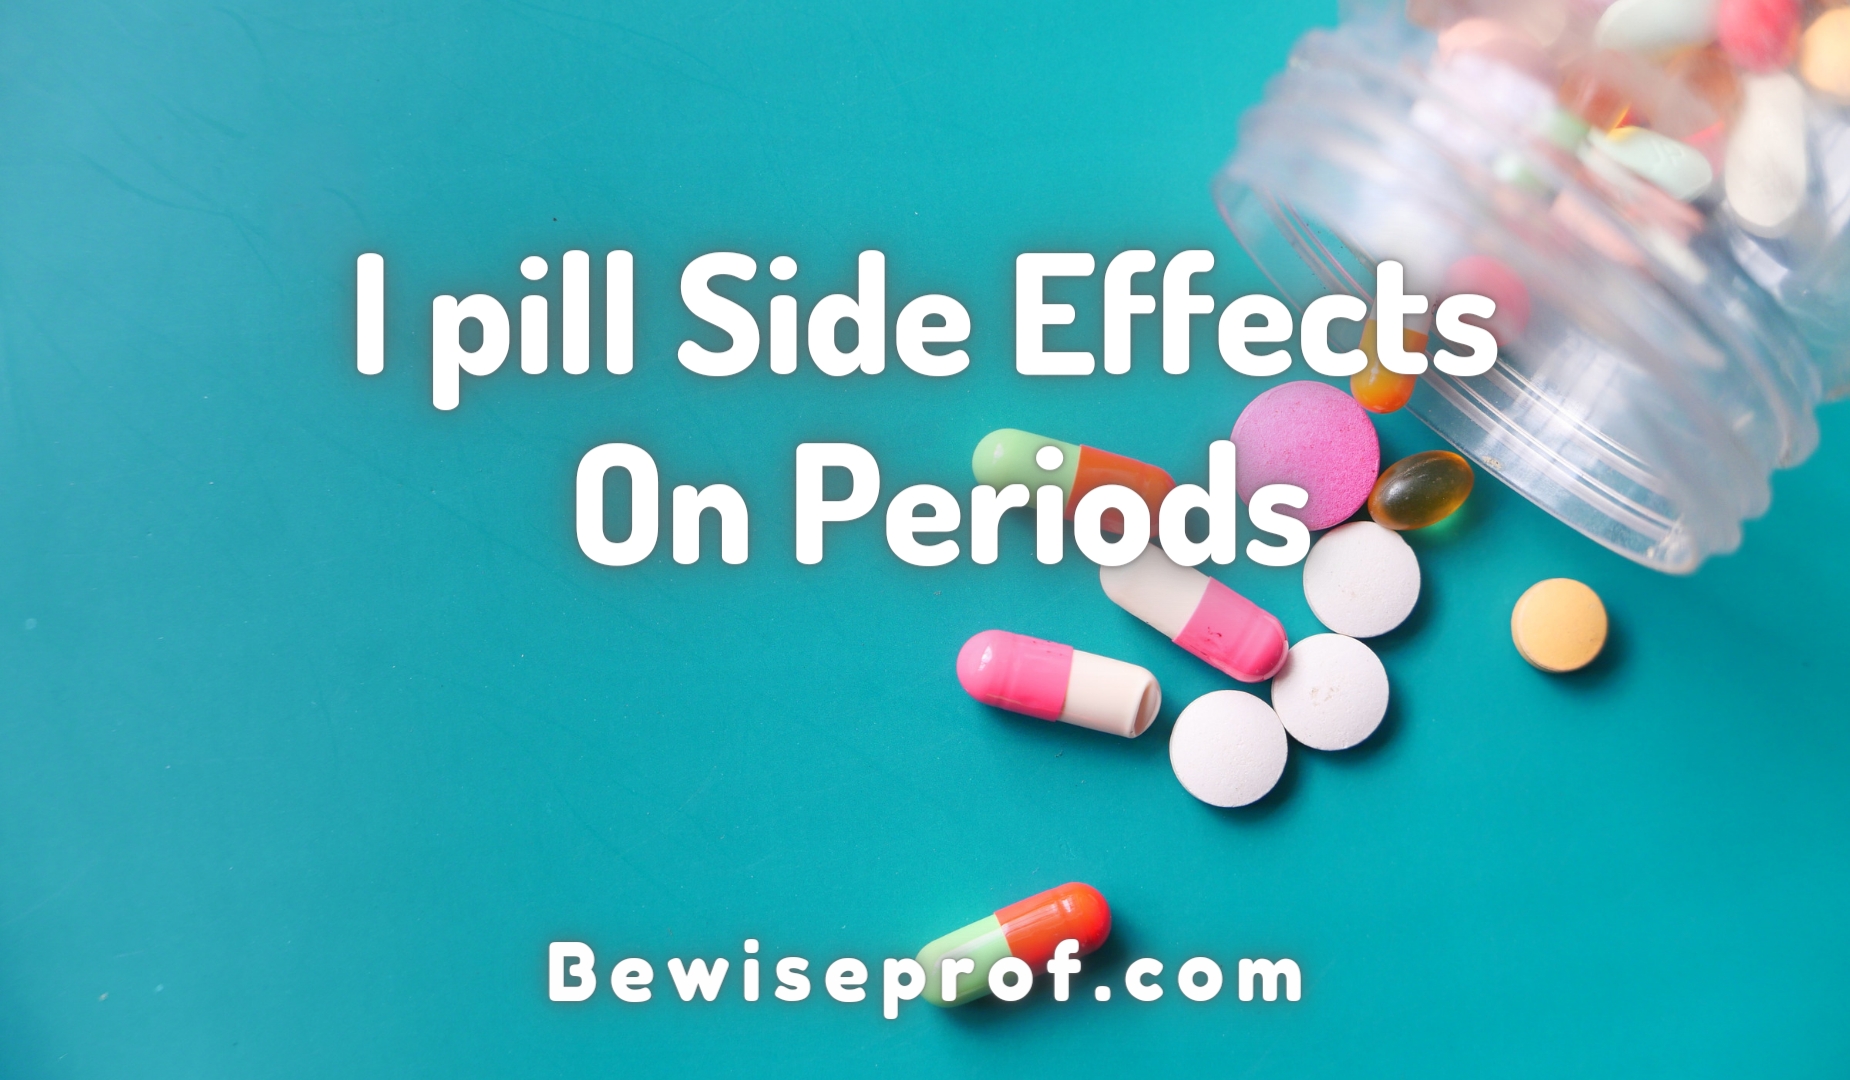 I pill Side Effects On Periods